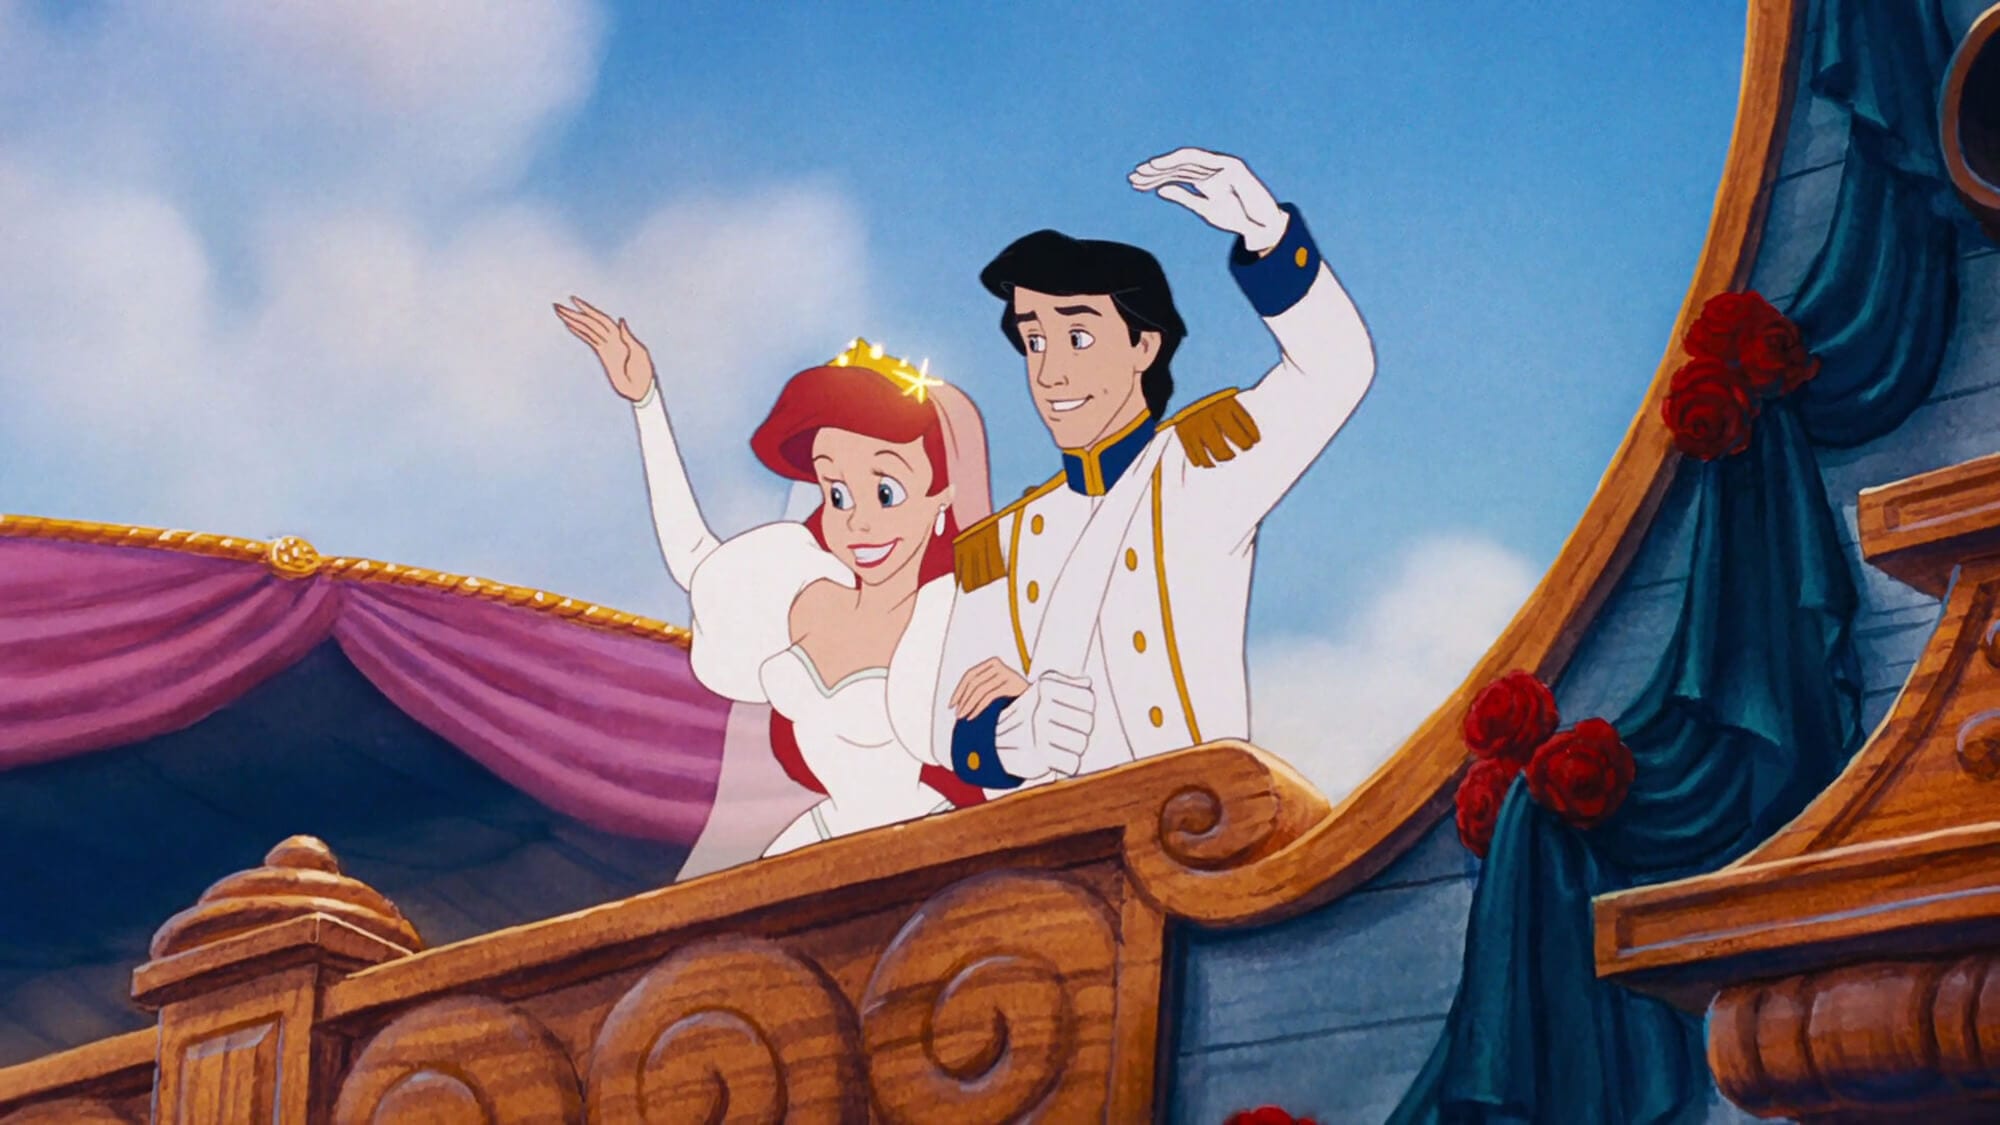 So This is Love: Ranking Disney's Fairy Tale Romances - Geeks + Gamers